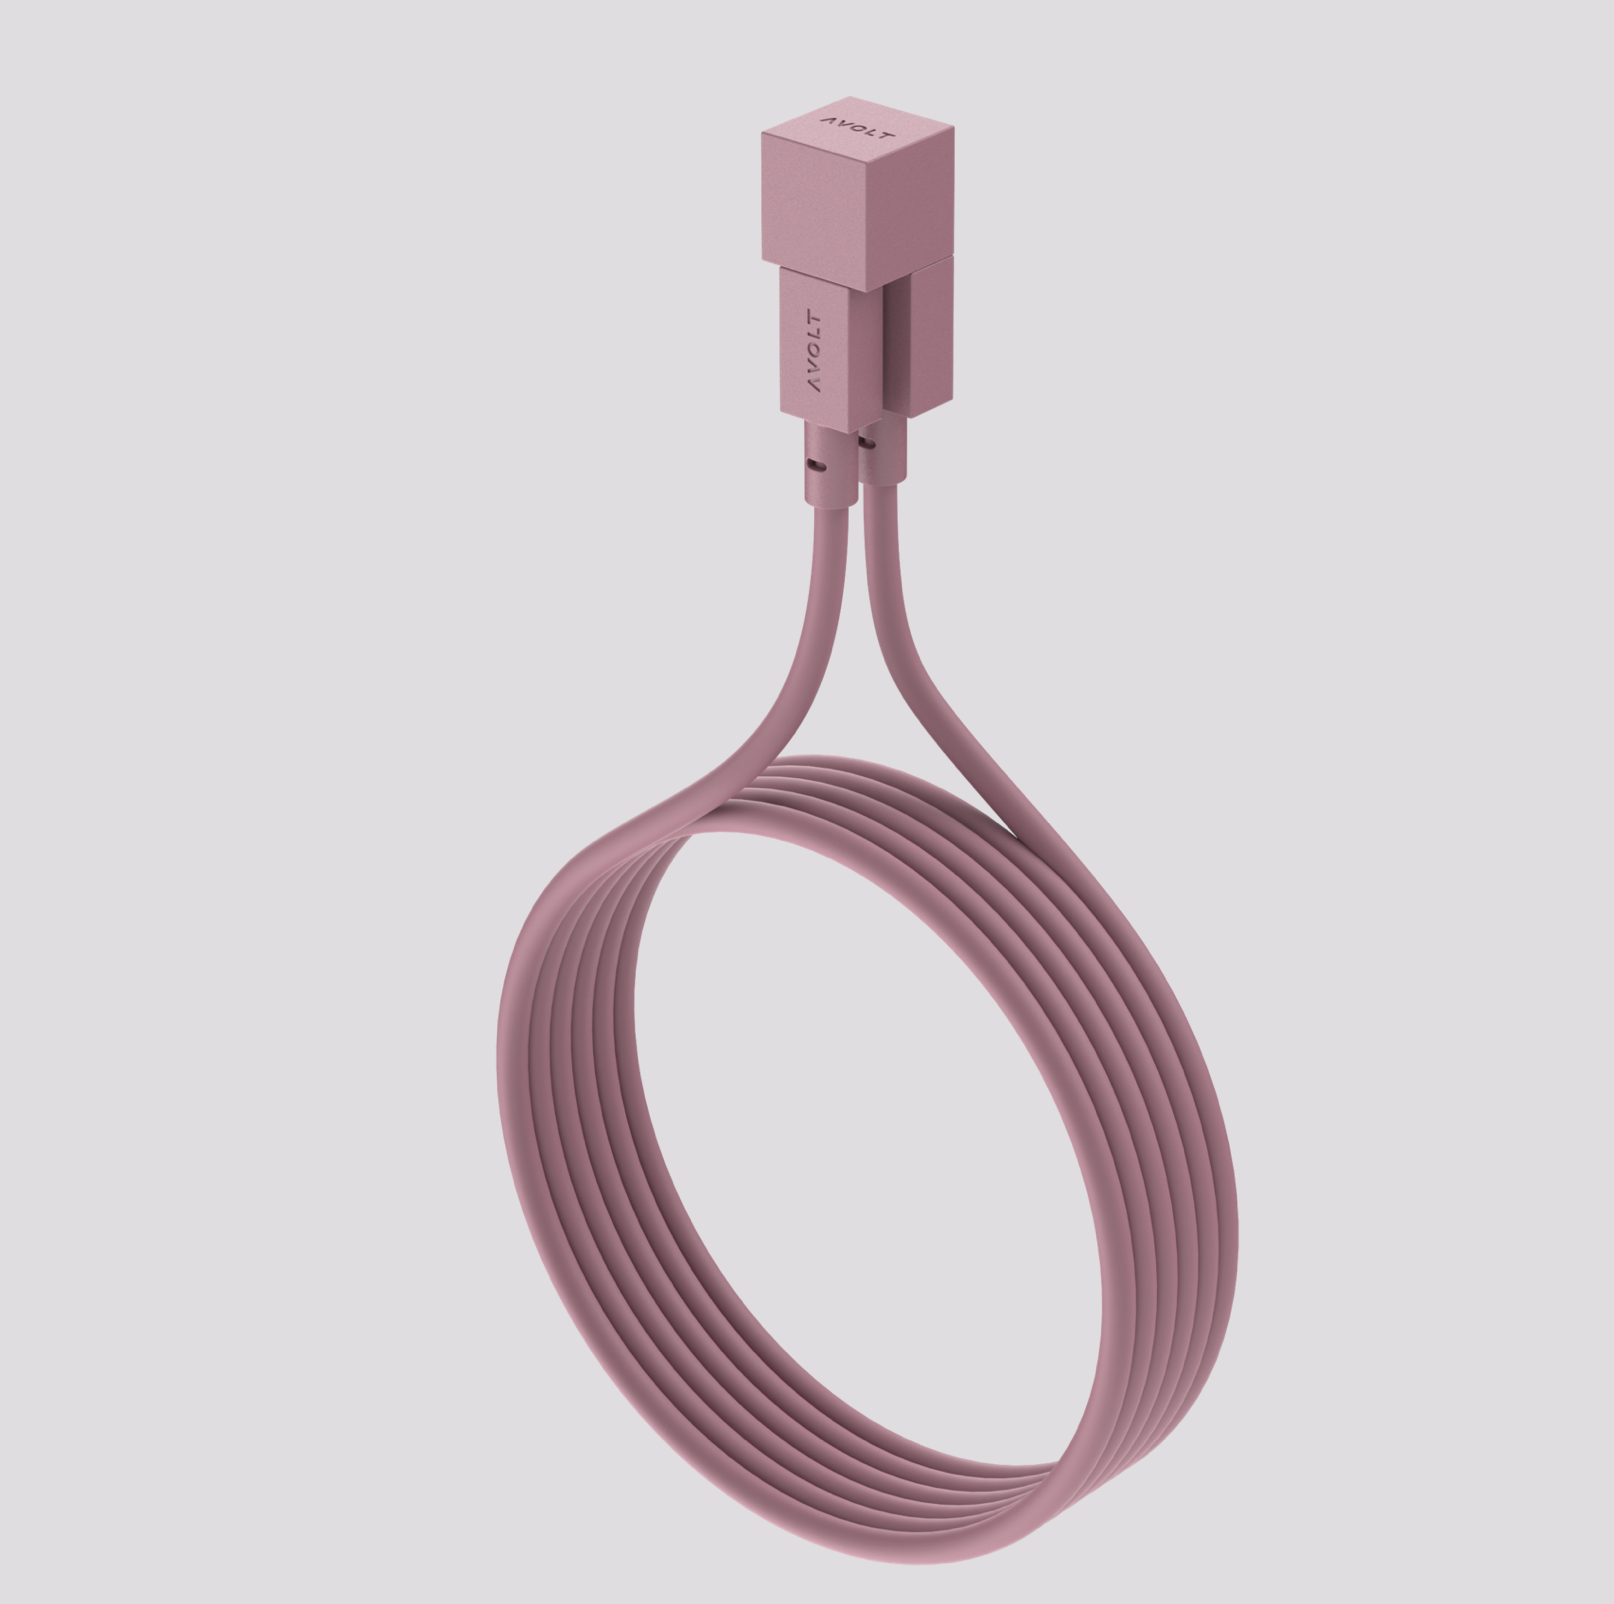 AVOLT CABLE 1 (RUSTY RED)